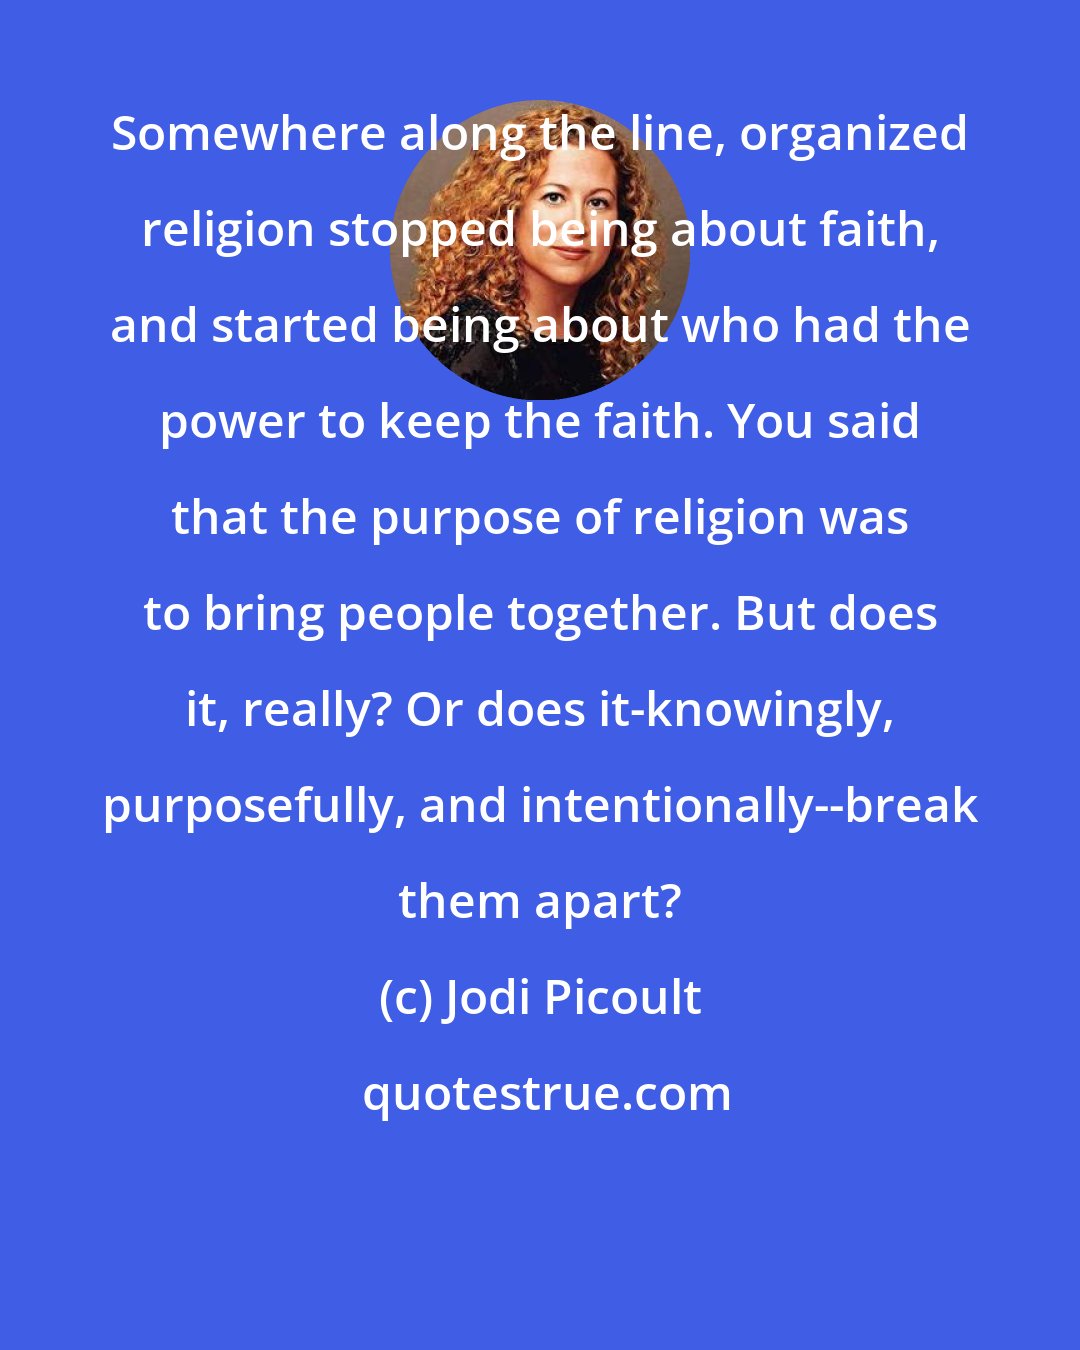 Jodi Picoult: Somewhere along the line, organized religion stopped being about faith, and started being about who had the power to keep the faith. You said that the purpose of religion was to bring people together. But does it, really? Or does it-knowingly, purposefully, and intentionally--break them apart?